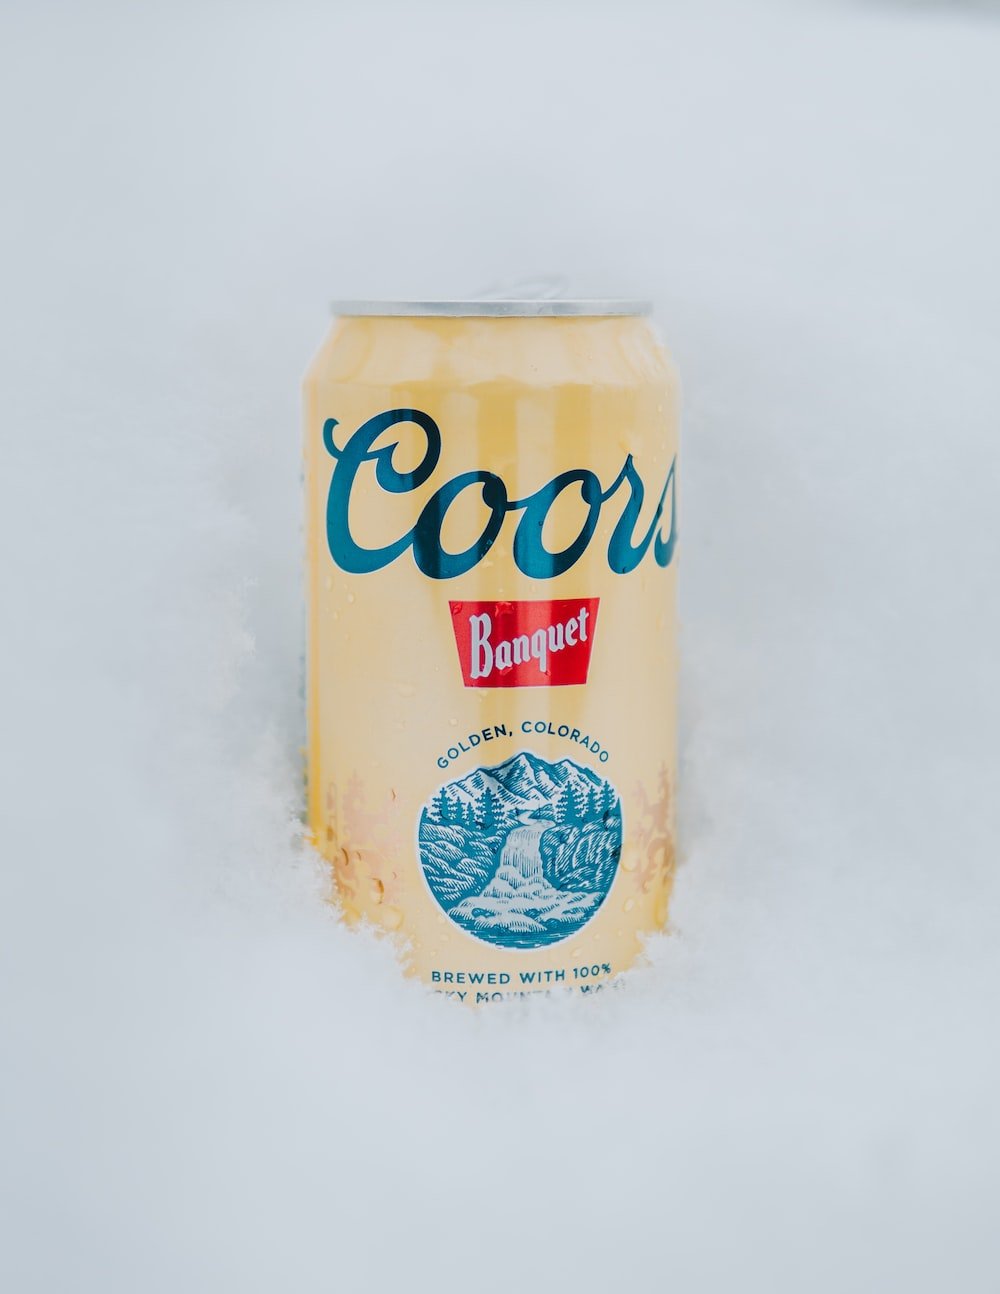 Coors Picture. Download Free Image